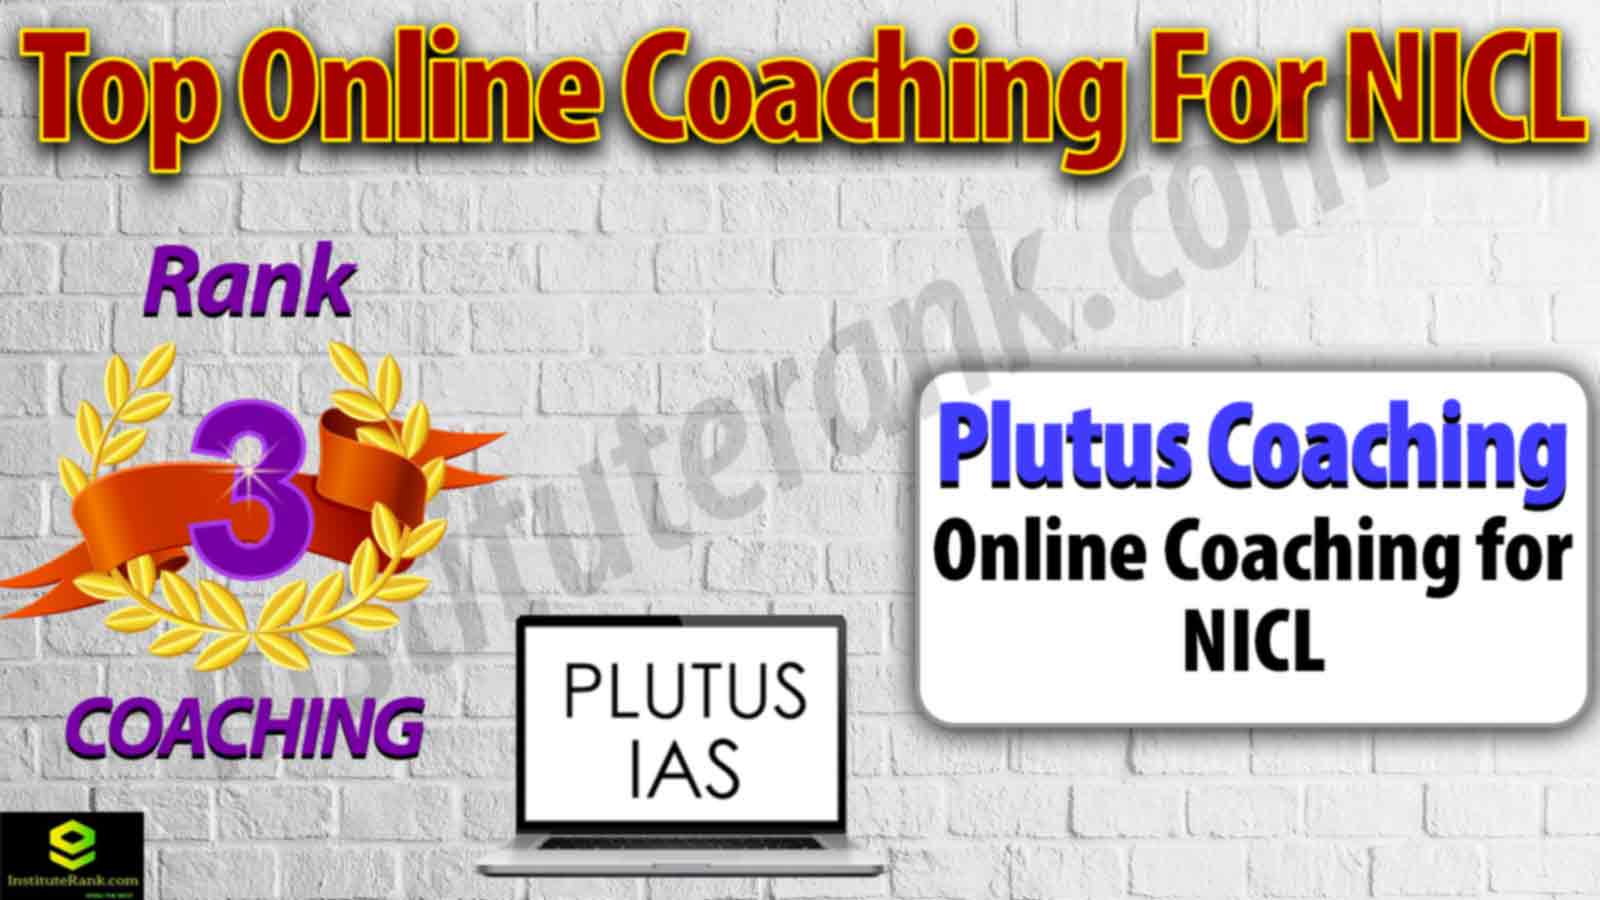 Best Online Coaching Centre for NICL Examination